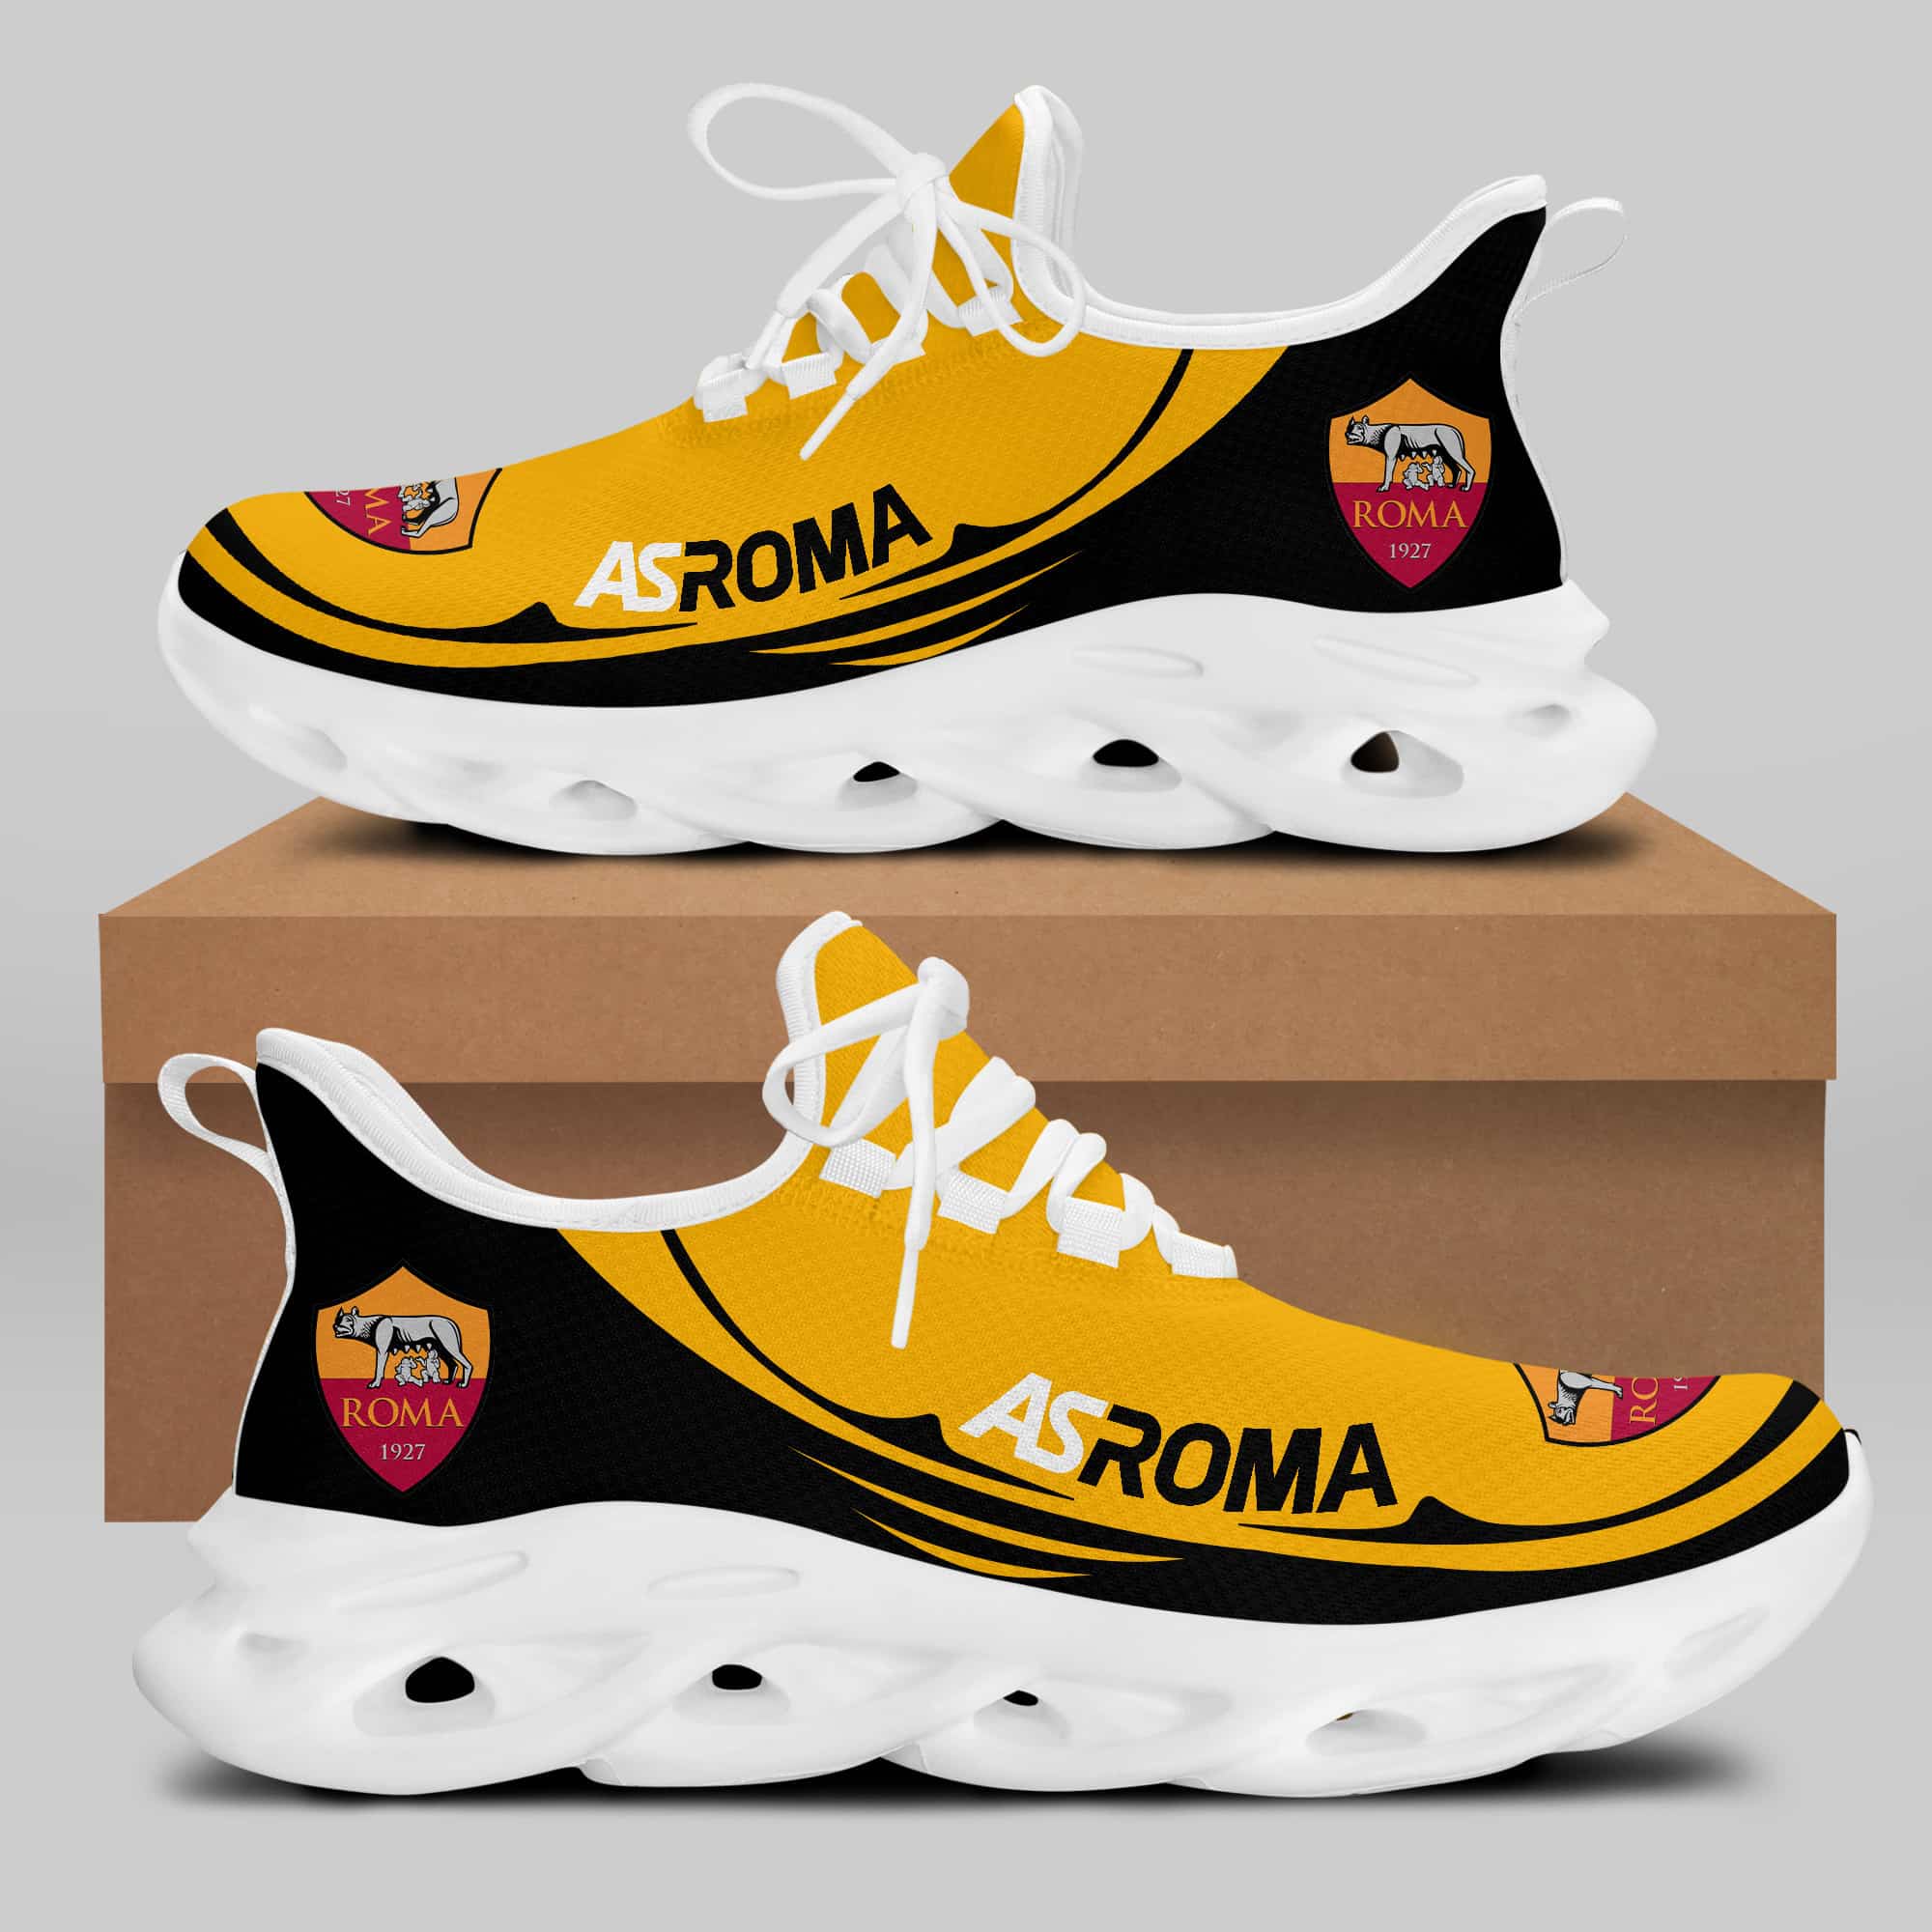 As Roma Running Shoes Max Soul Shoes Sneakers Ver 36 2